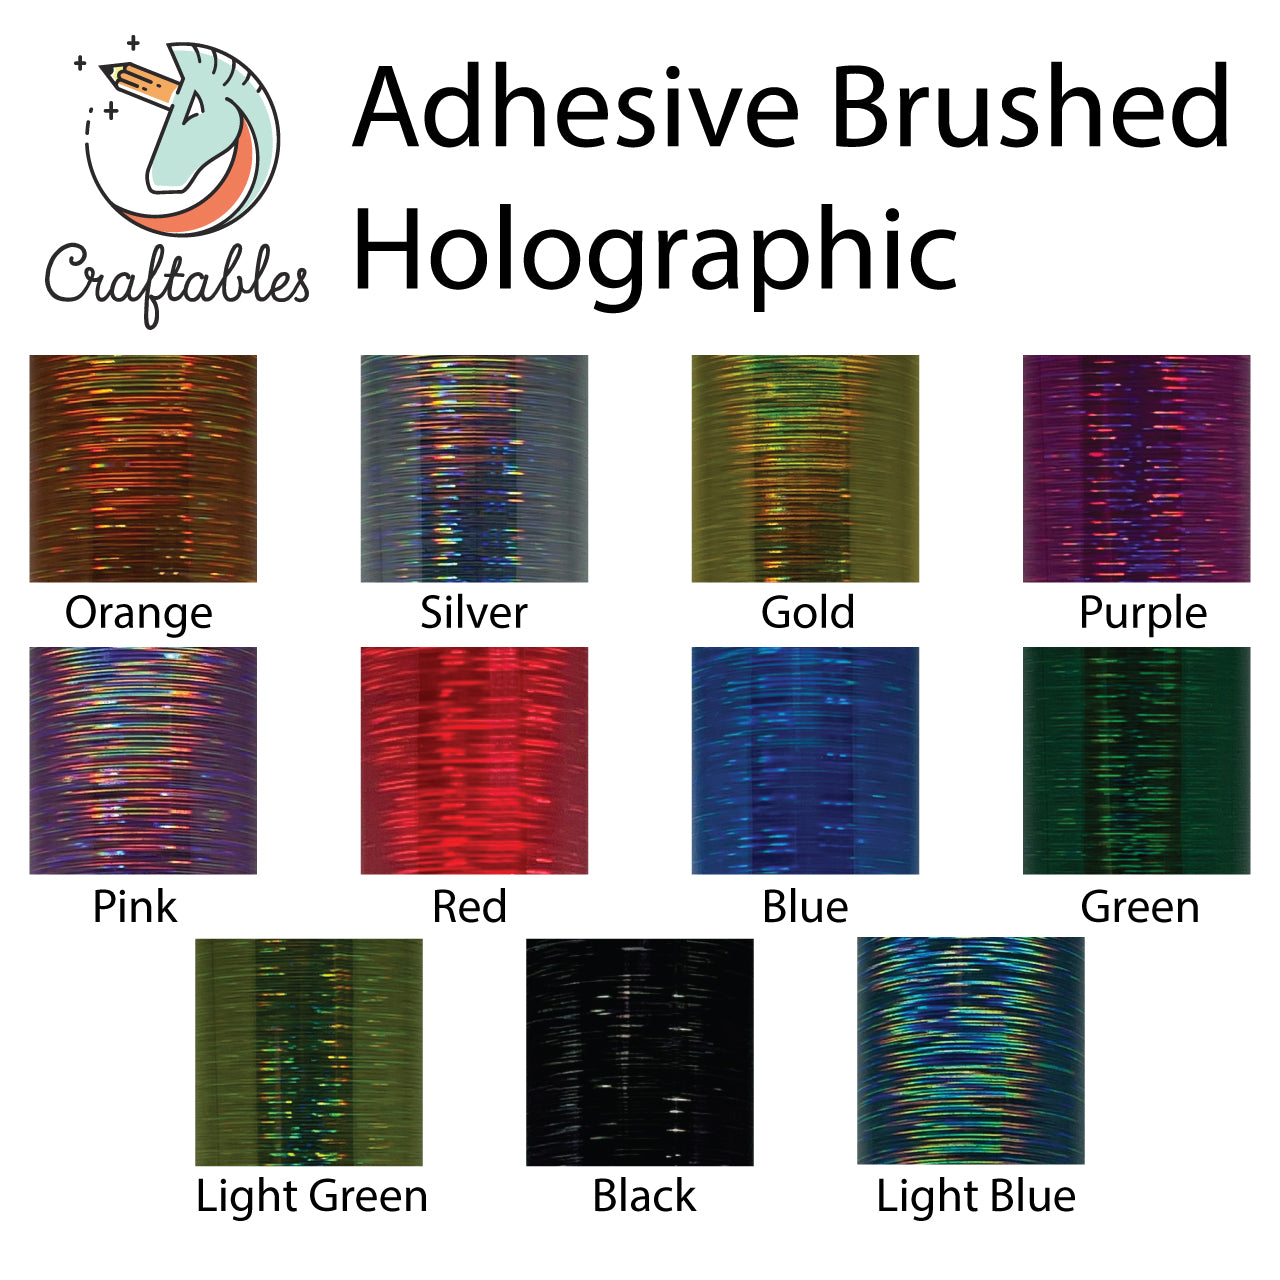 Gold Brushed Holographic Adhesive Vinyl Rolls By Craftables